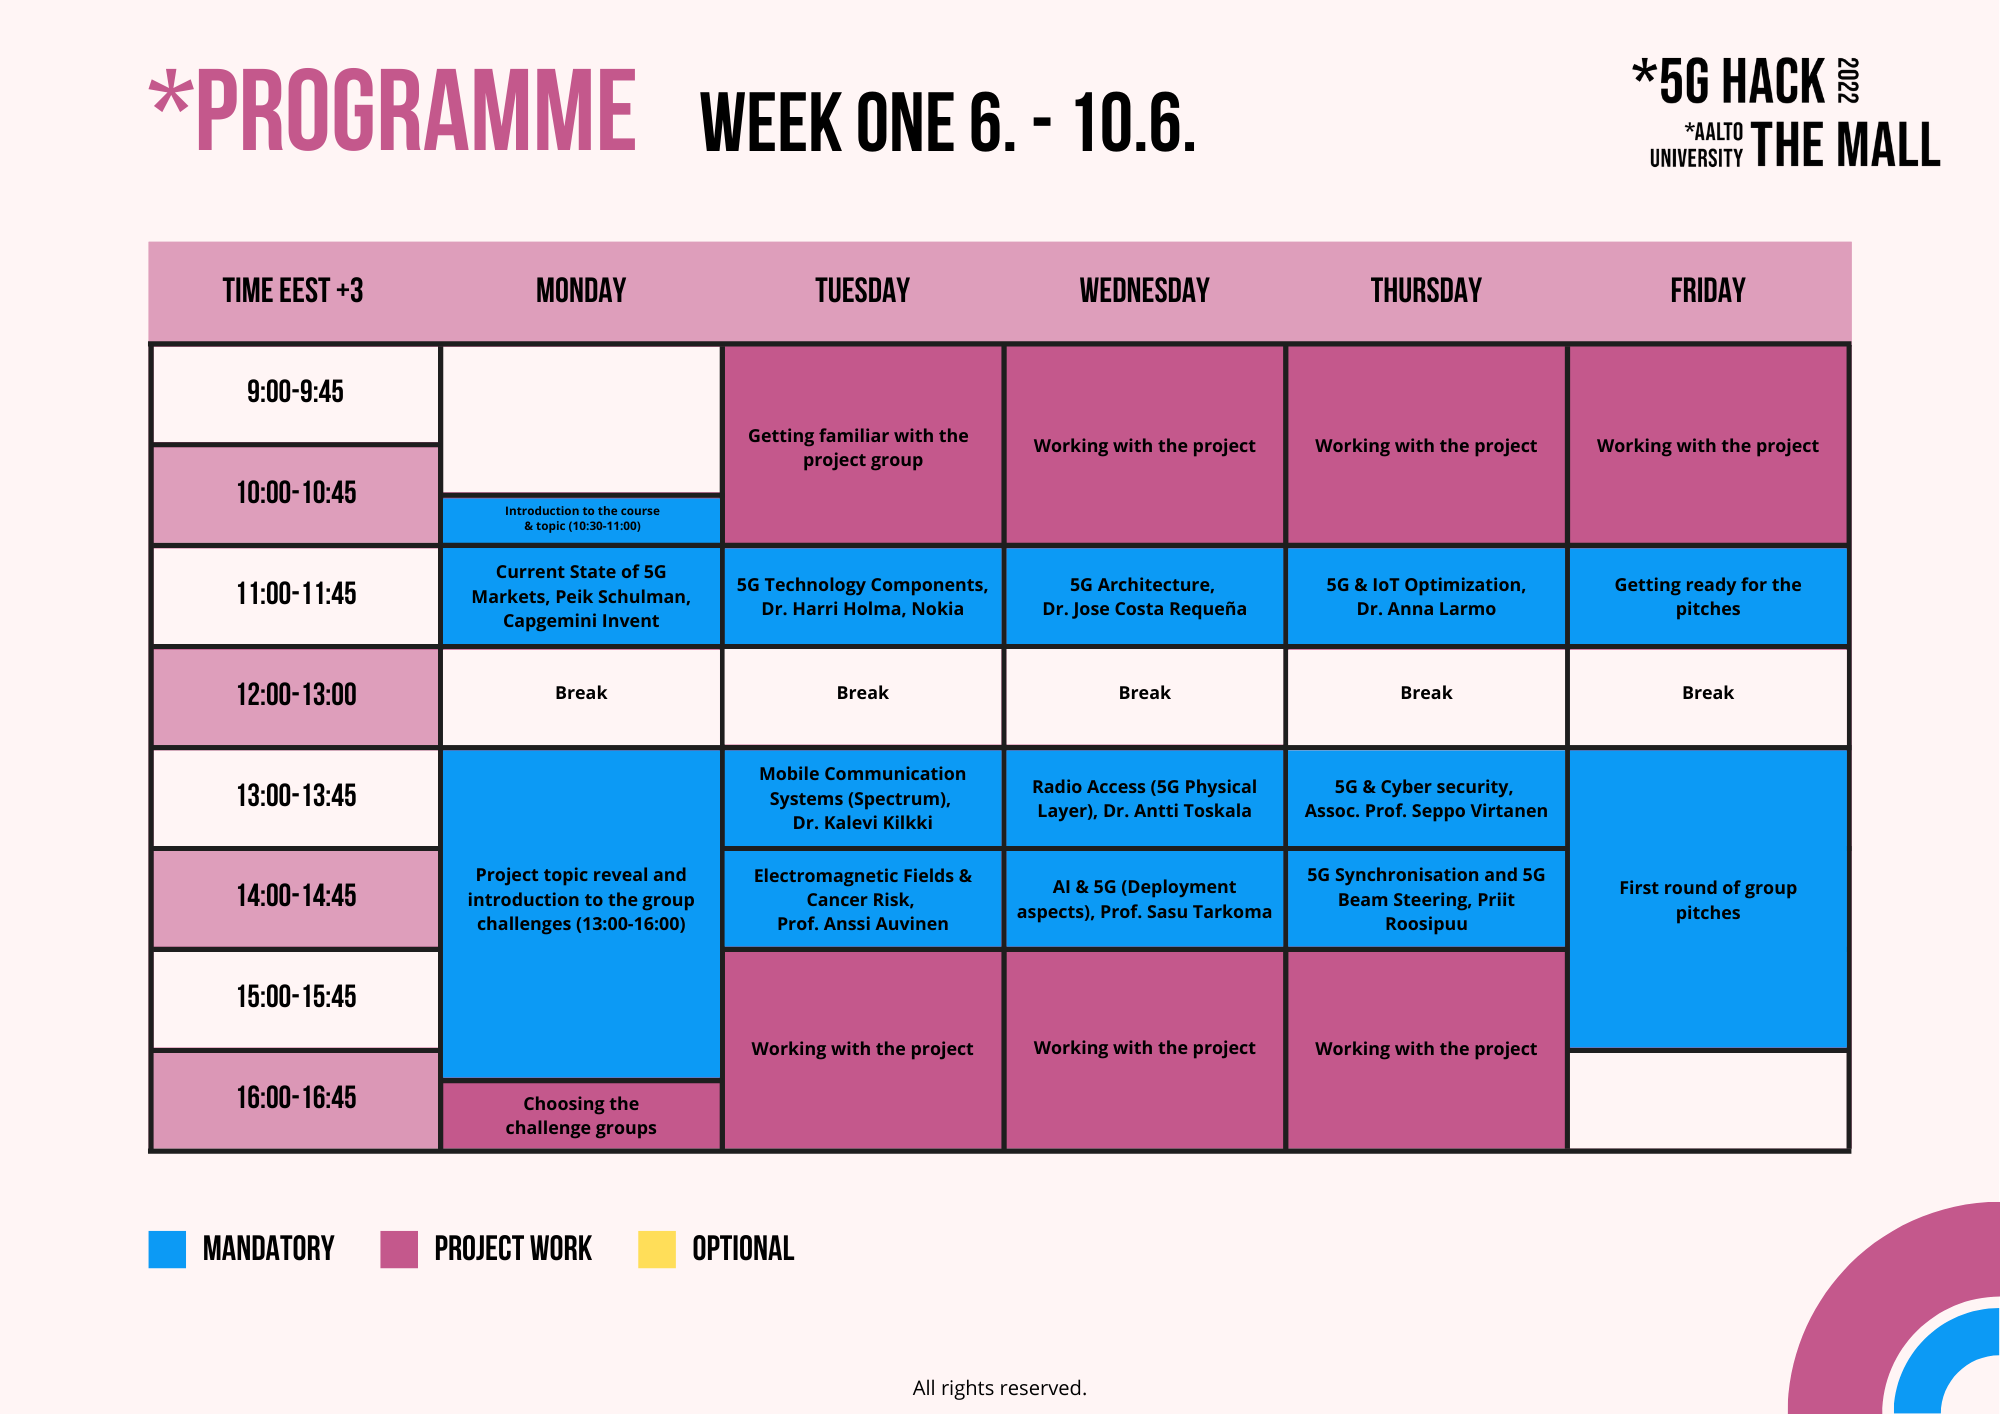 Programme for week one